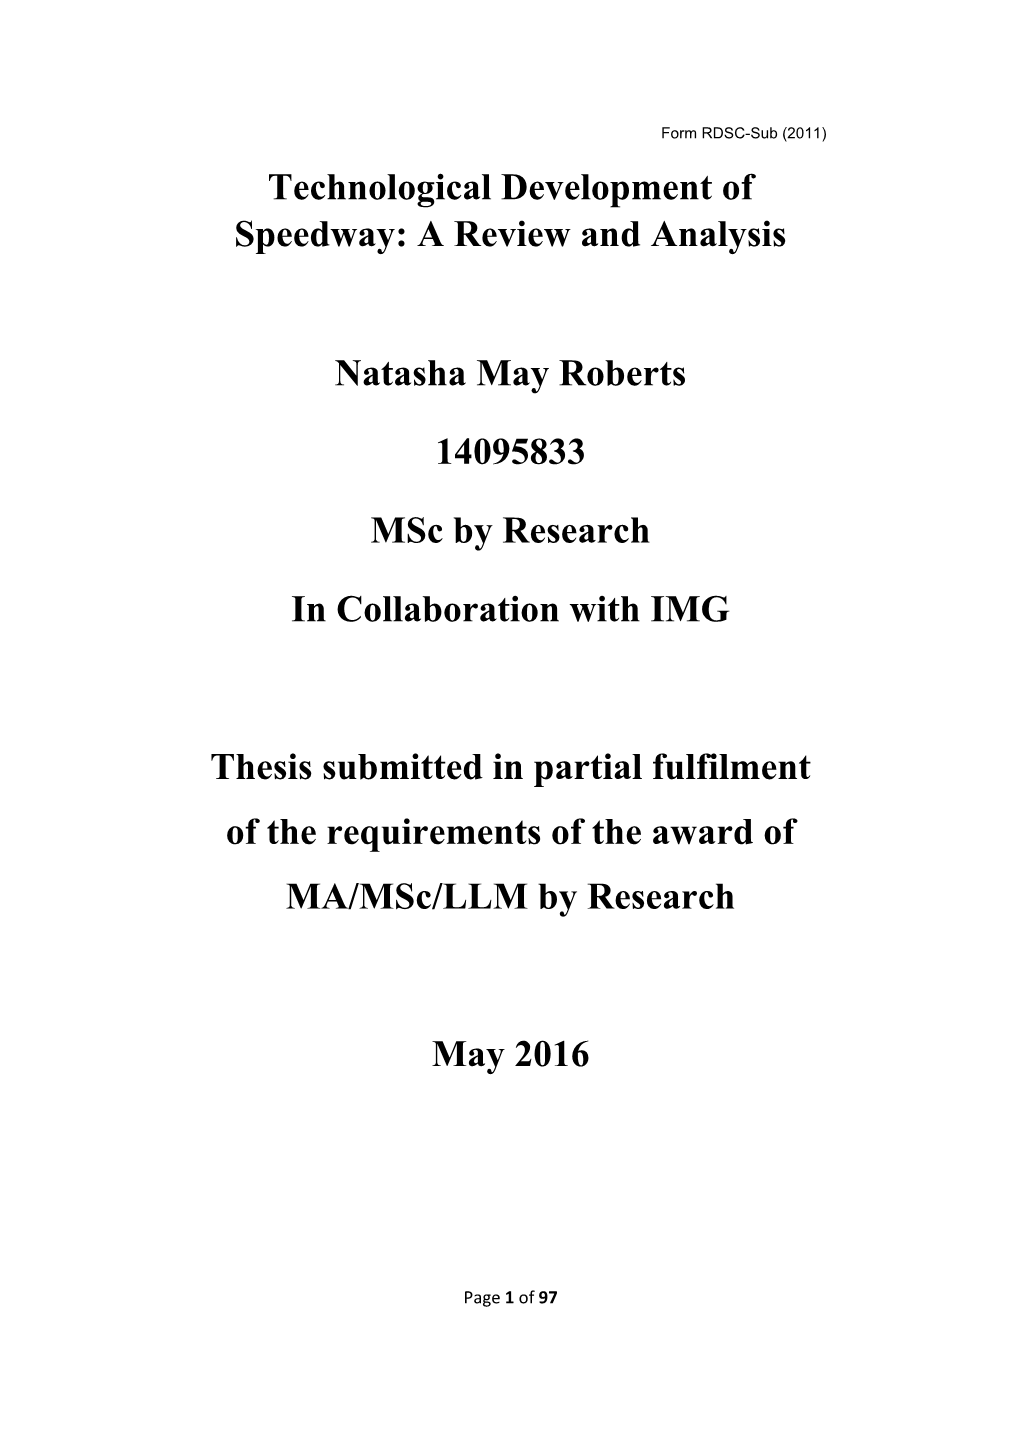 Technological Development of Speedway: a Review and Analysis